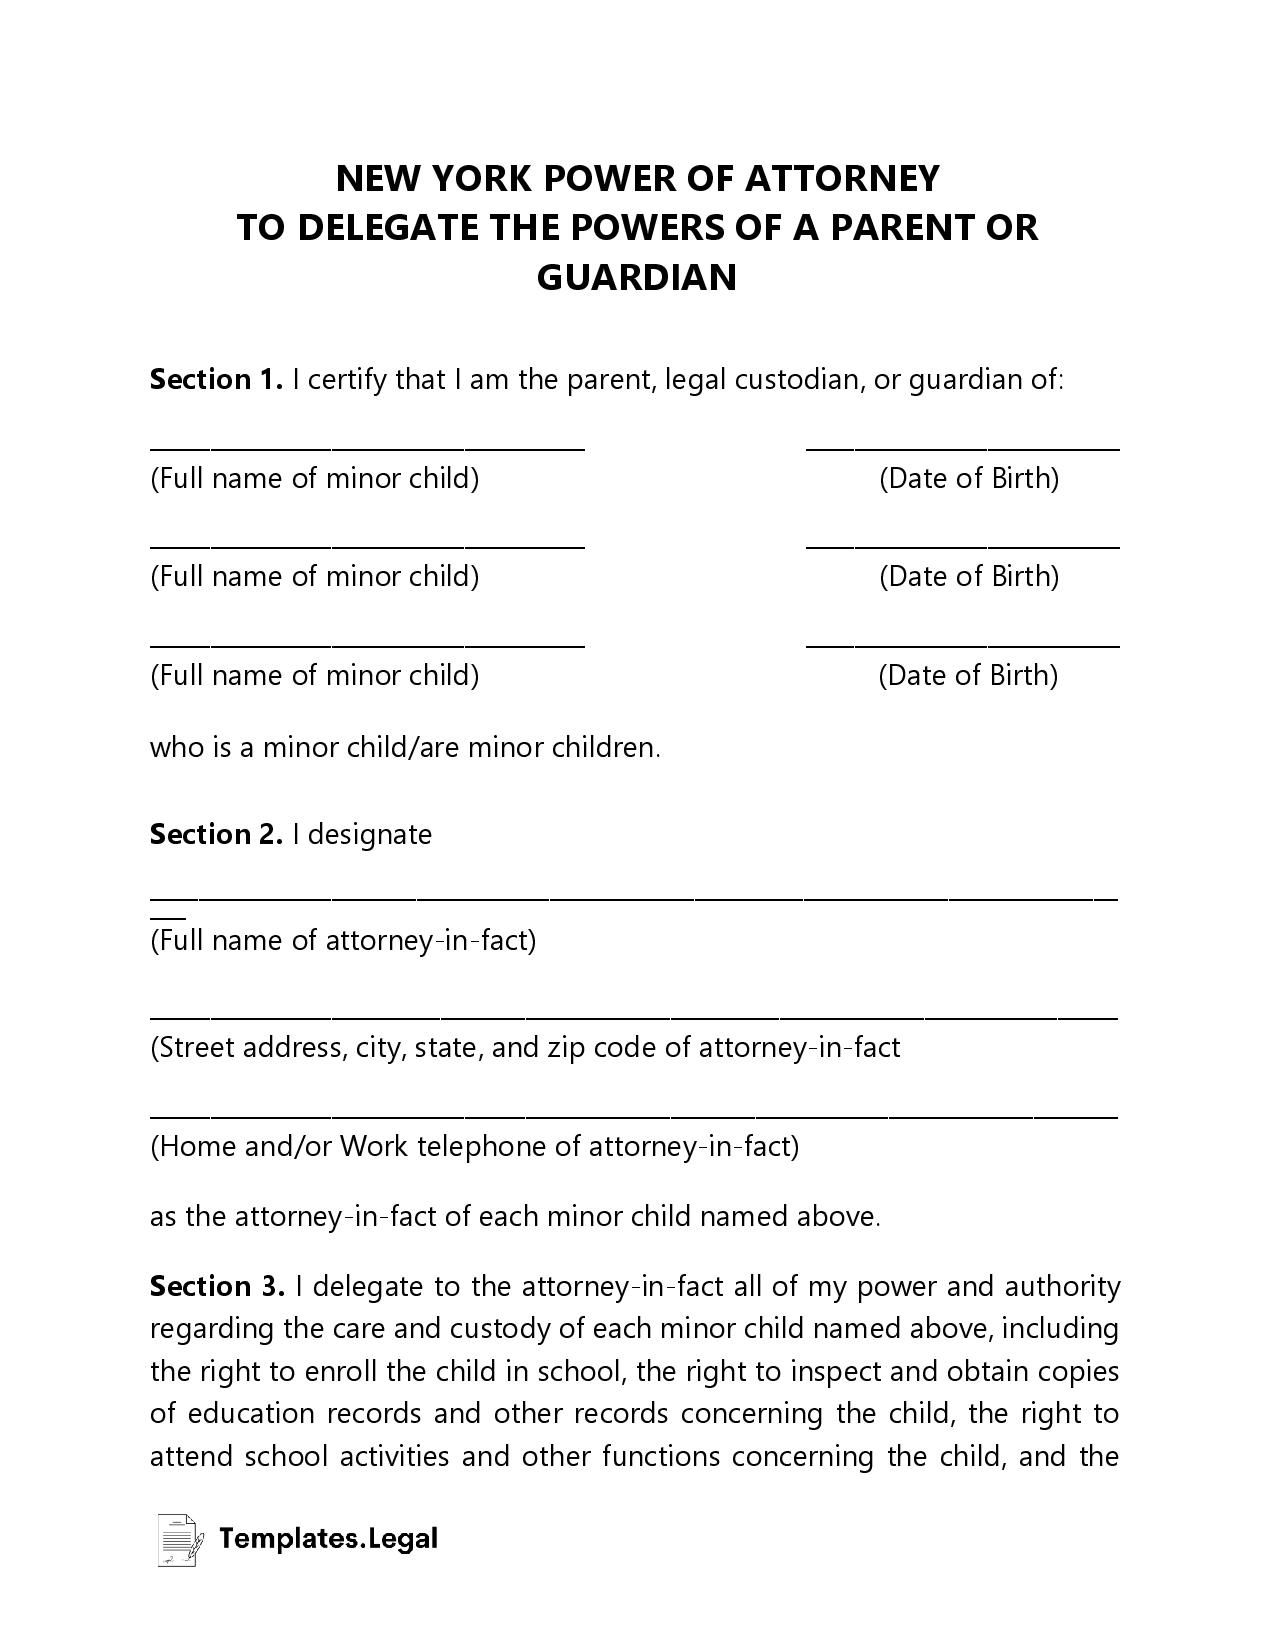 New York Minor (Child) Power of Attorney - Templates.Legal